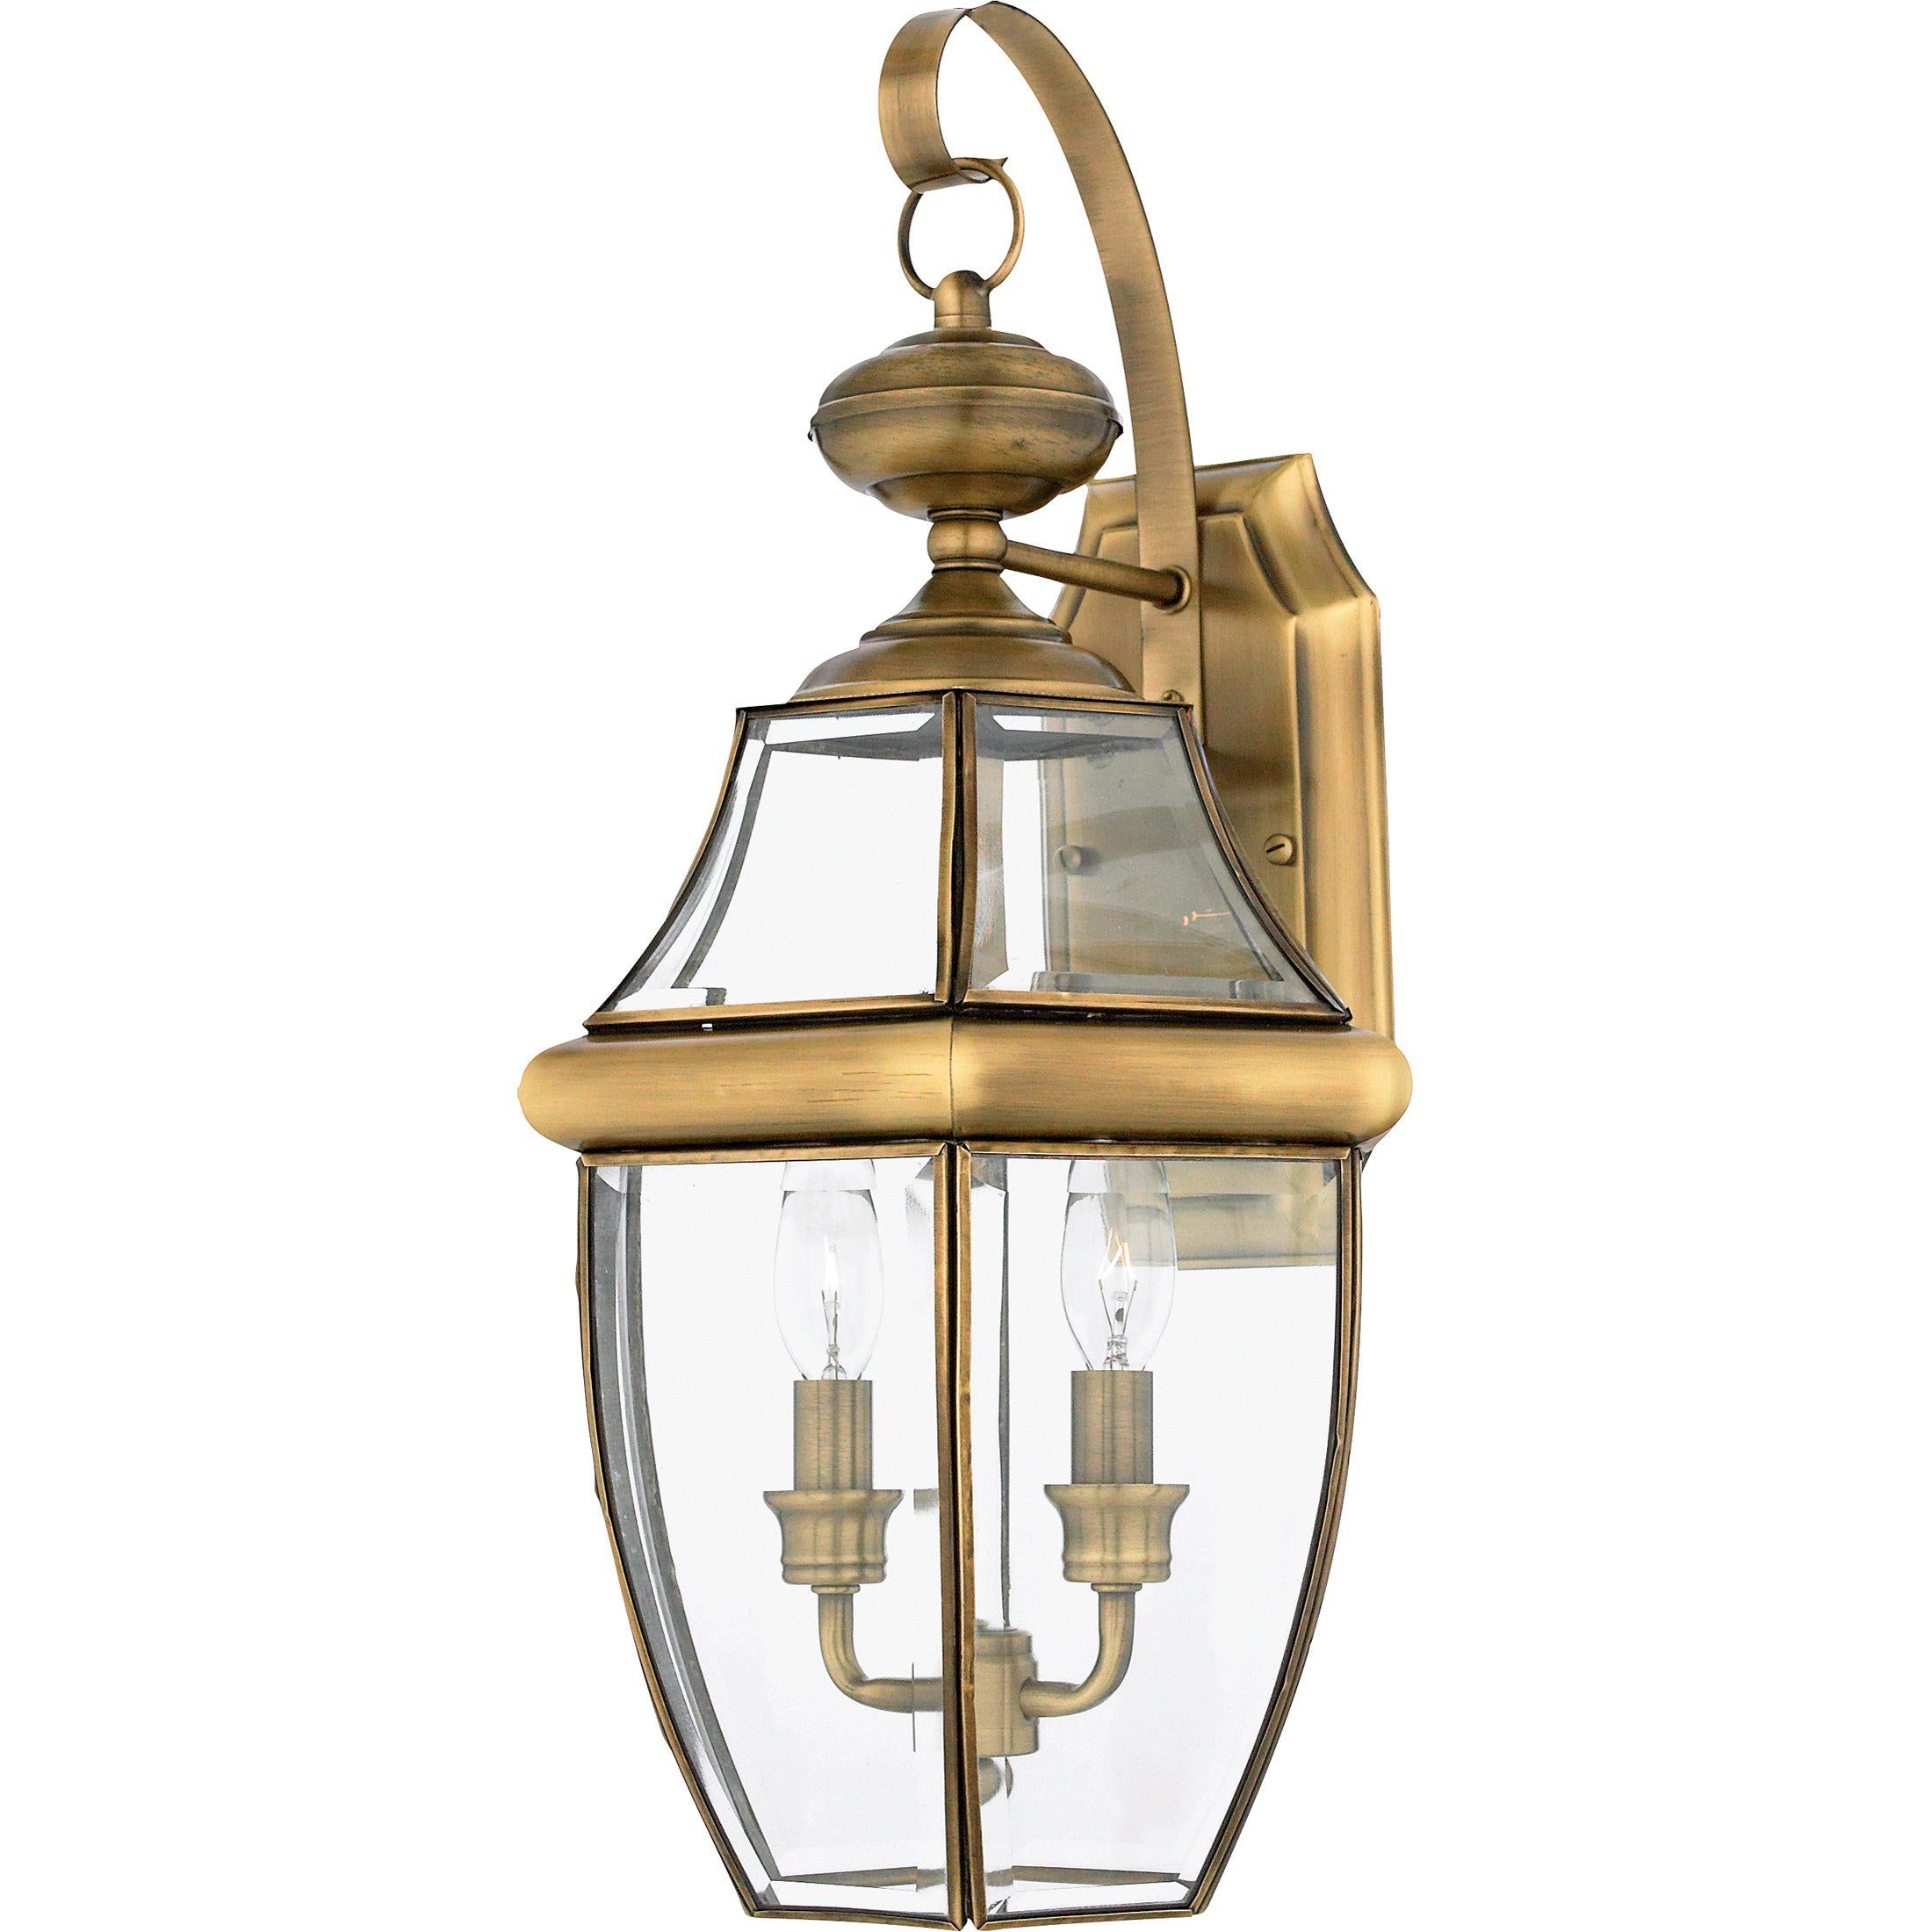 Quoizel  Newbury Outdoor Lantern, Large Outdoor l Wall Quoizel   